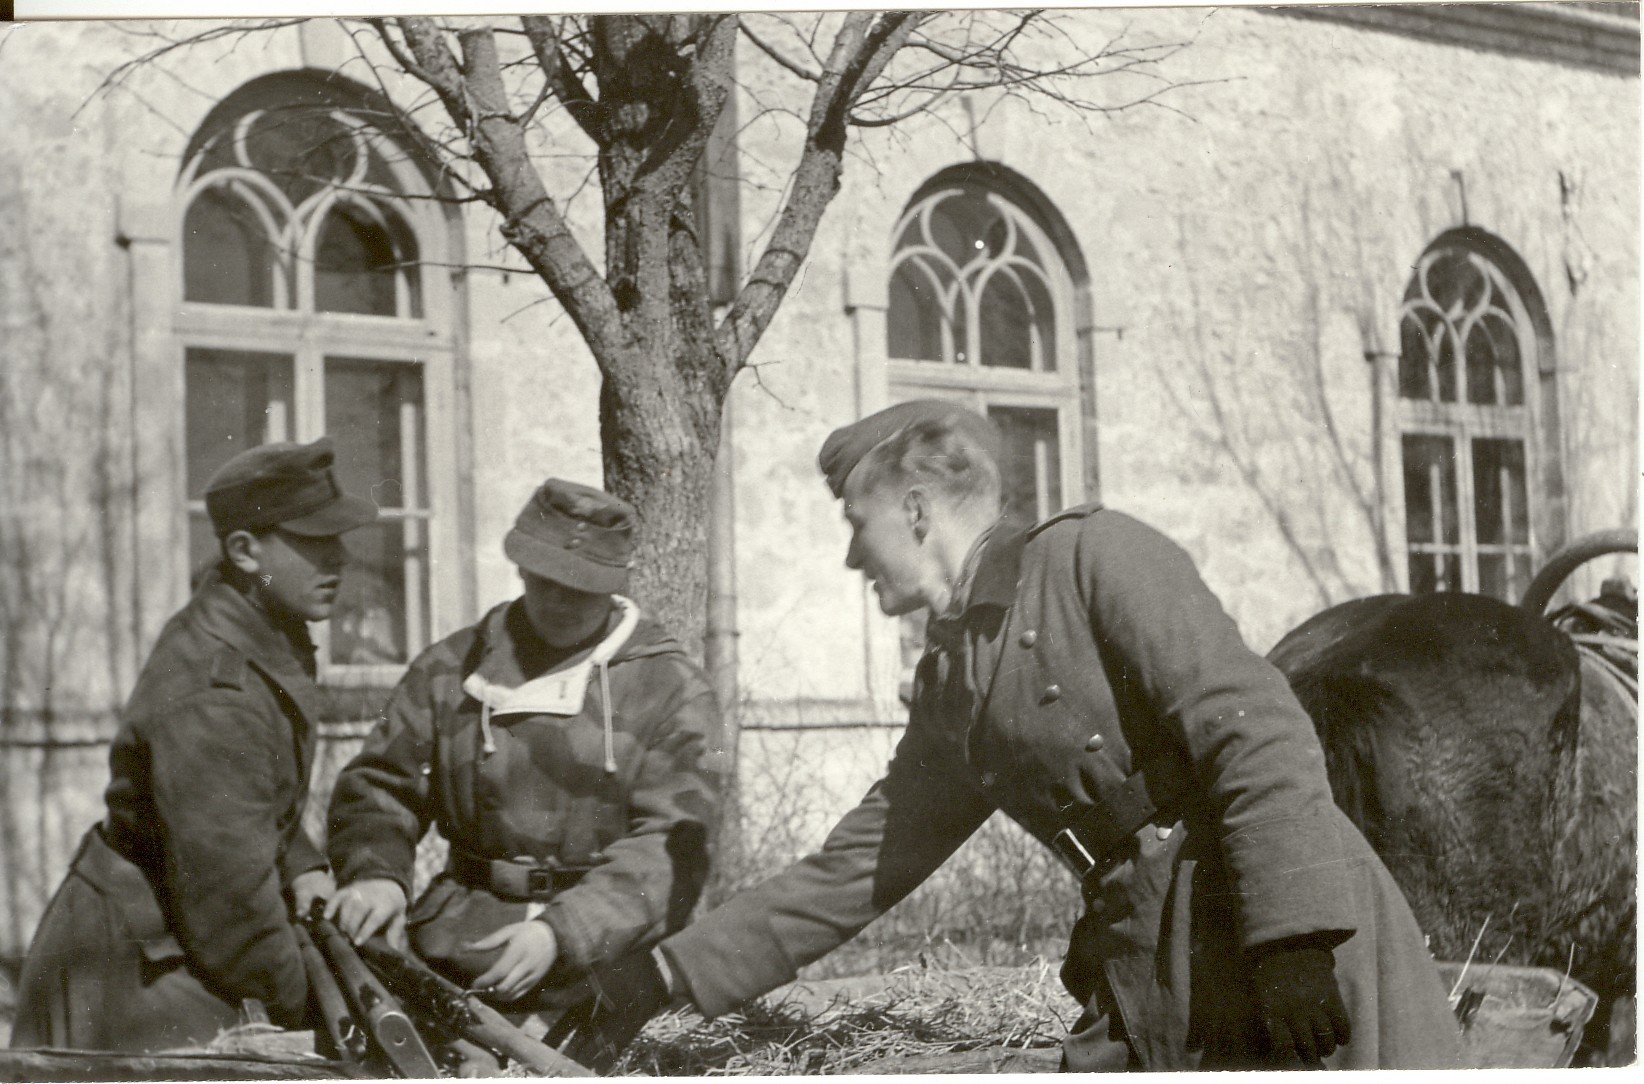 Photocopy, during the German occupation in Paides in 1944.